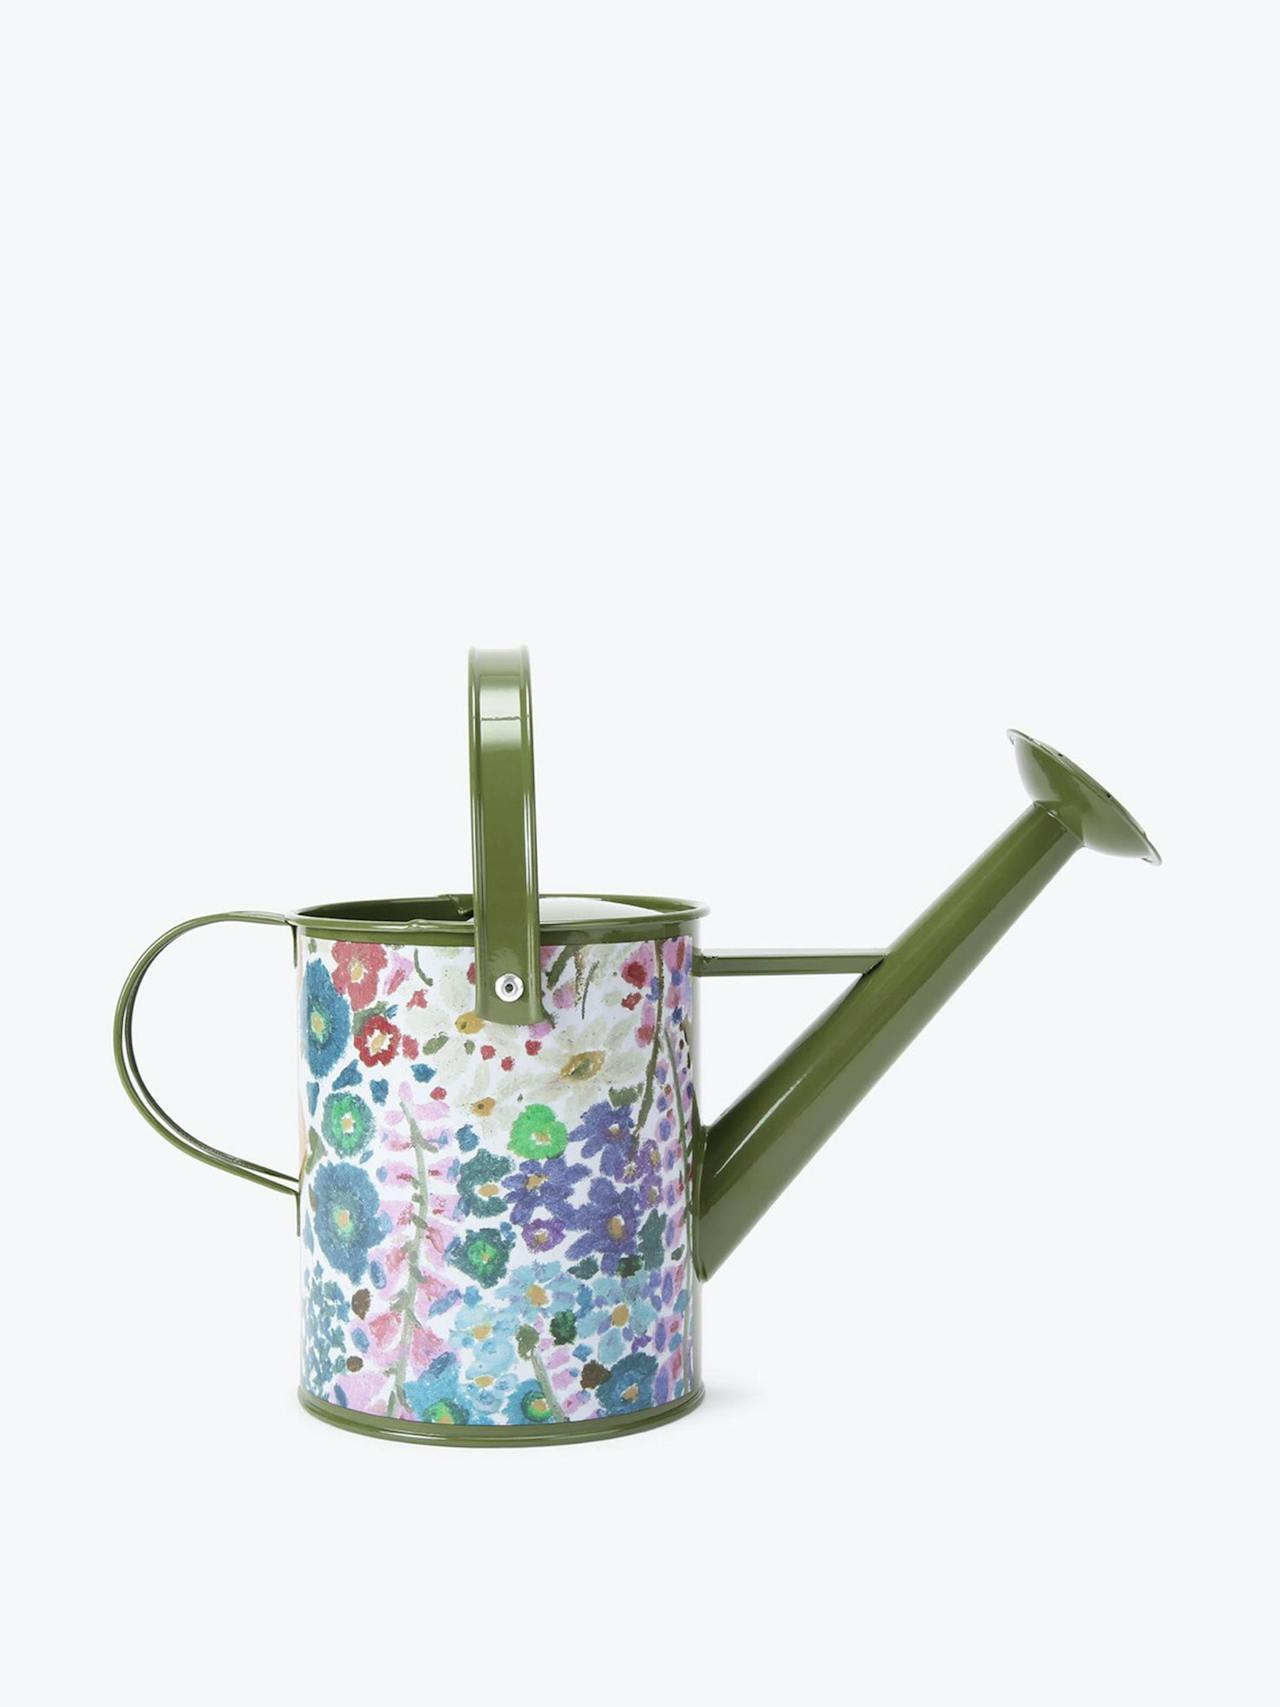 Floral couture watering can